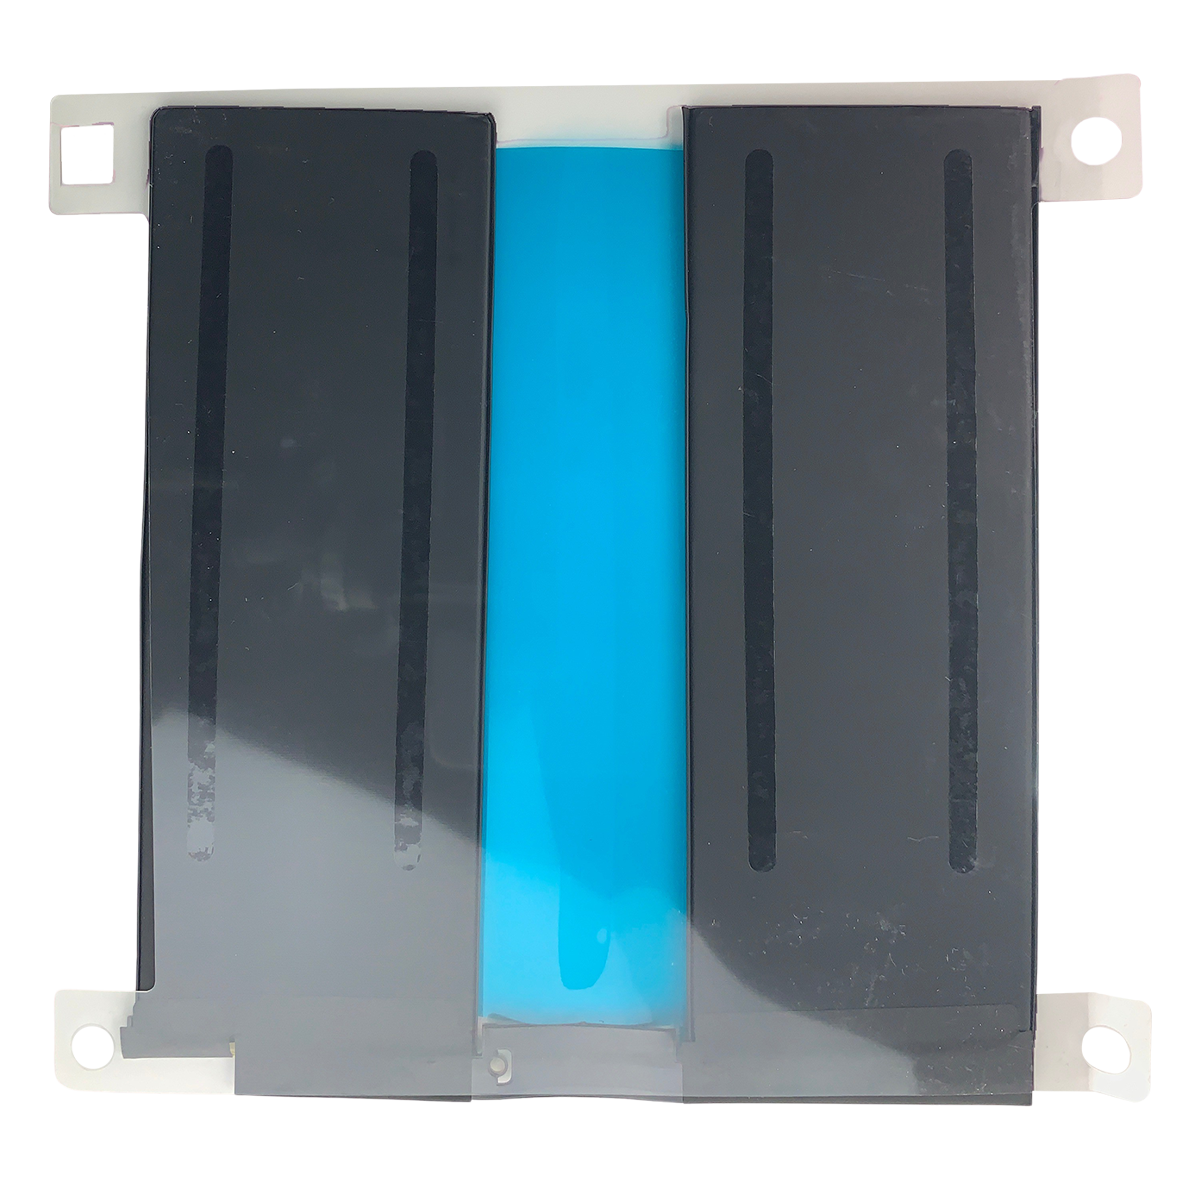 iPad Air 3 Battery Replacement